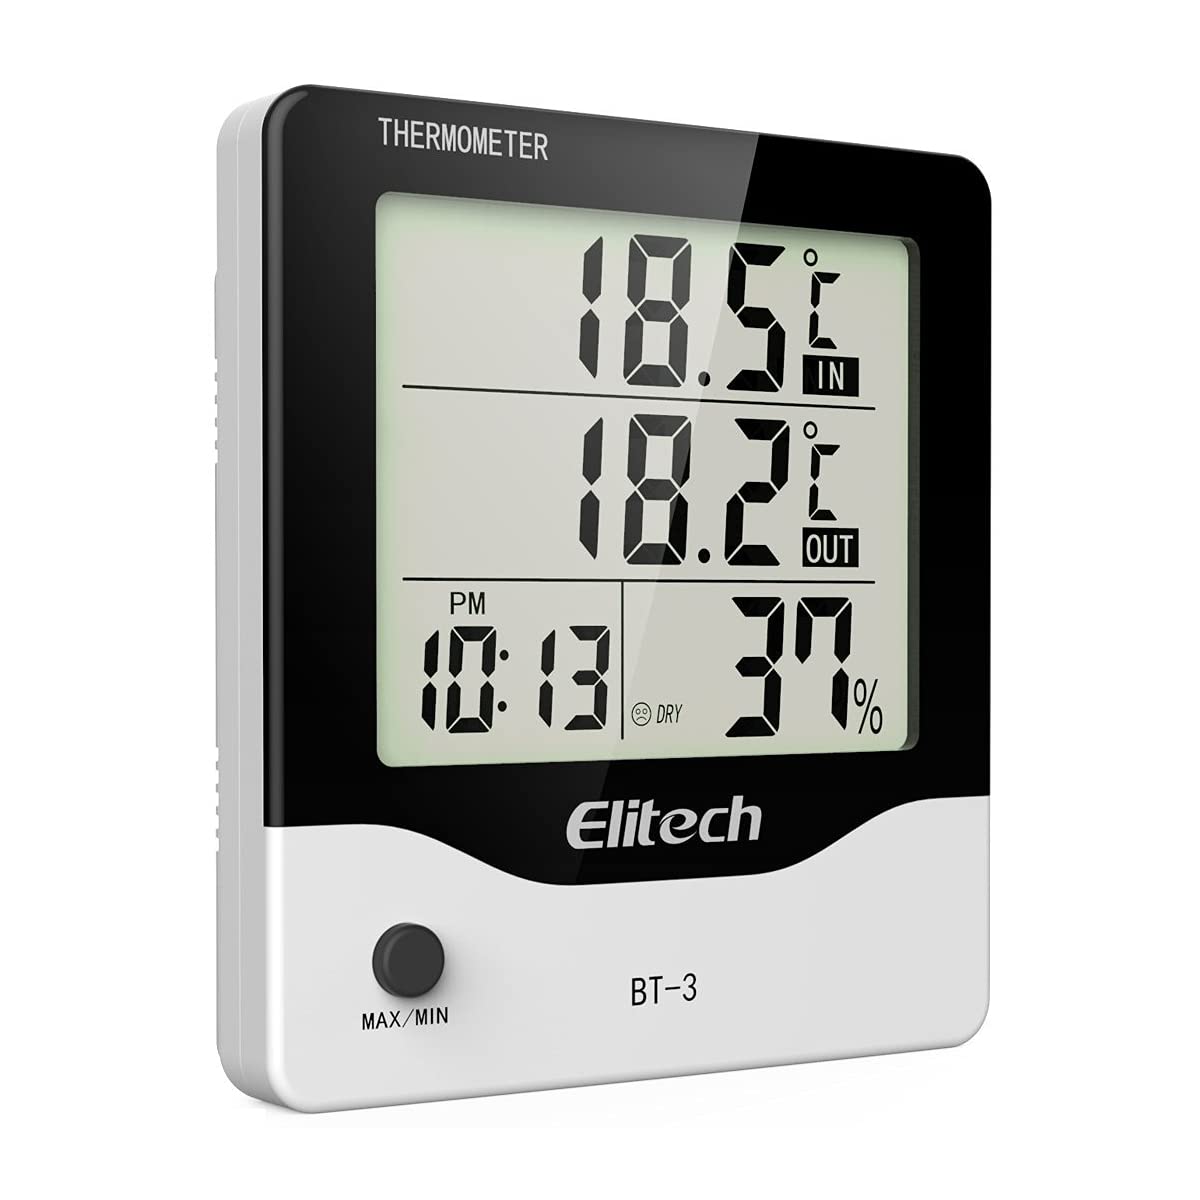 Elitech BT-3 Digital Hygrometer Thermometer Temperature and Humidity Monitor Indoor/Outdoor